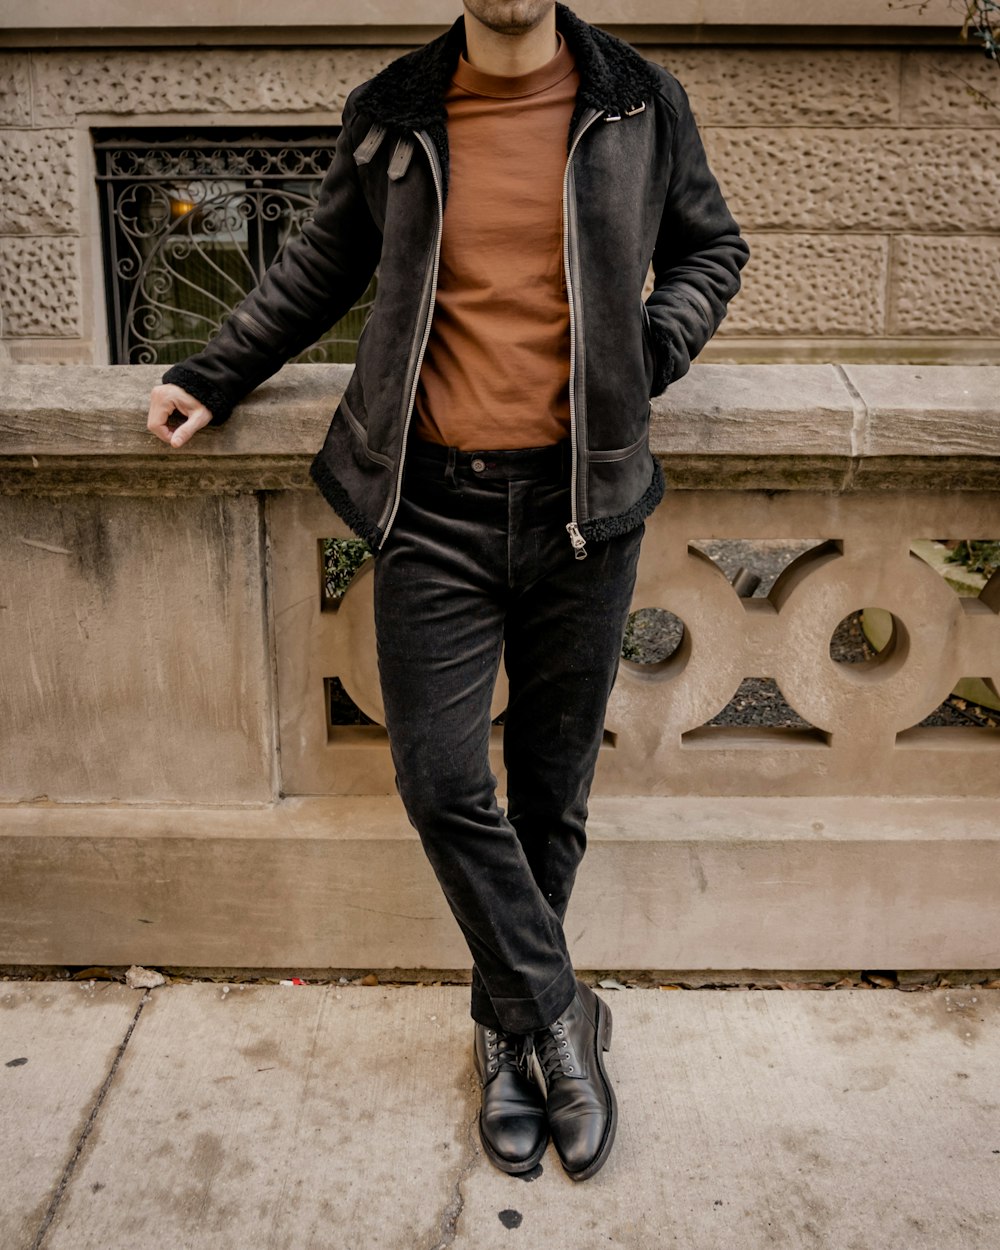 Man black leather jacket and blue denim jeans standing on gray concrete stairs photo – Free Il Image on Unsplash